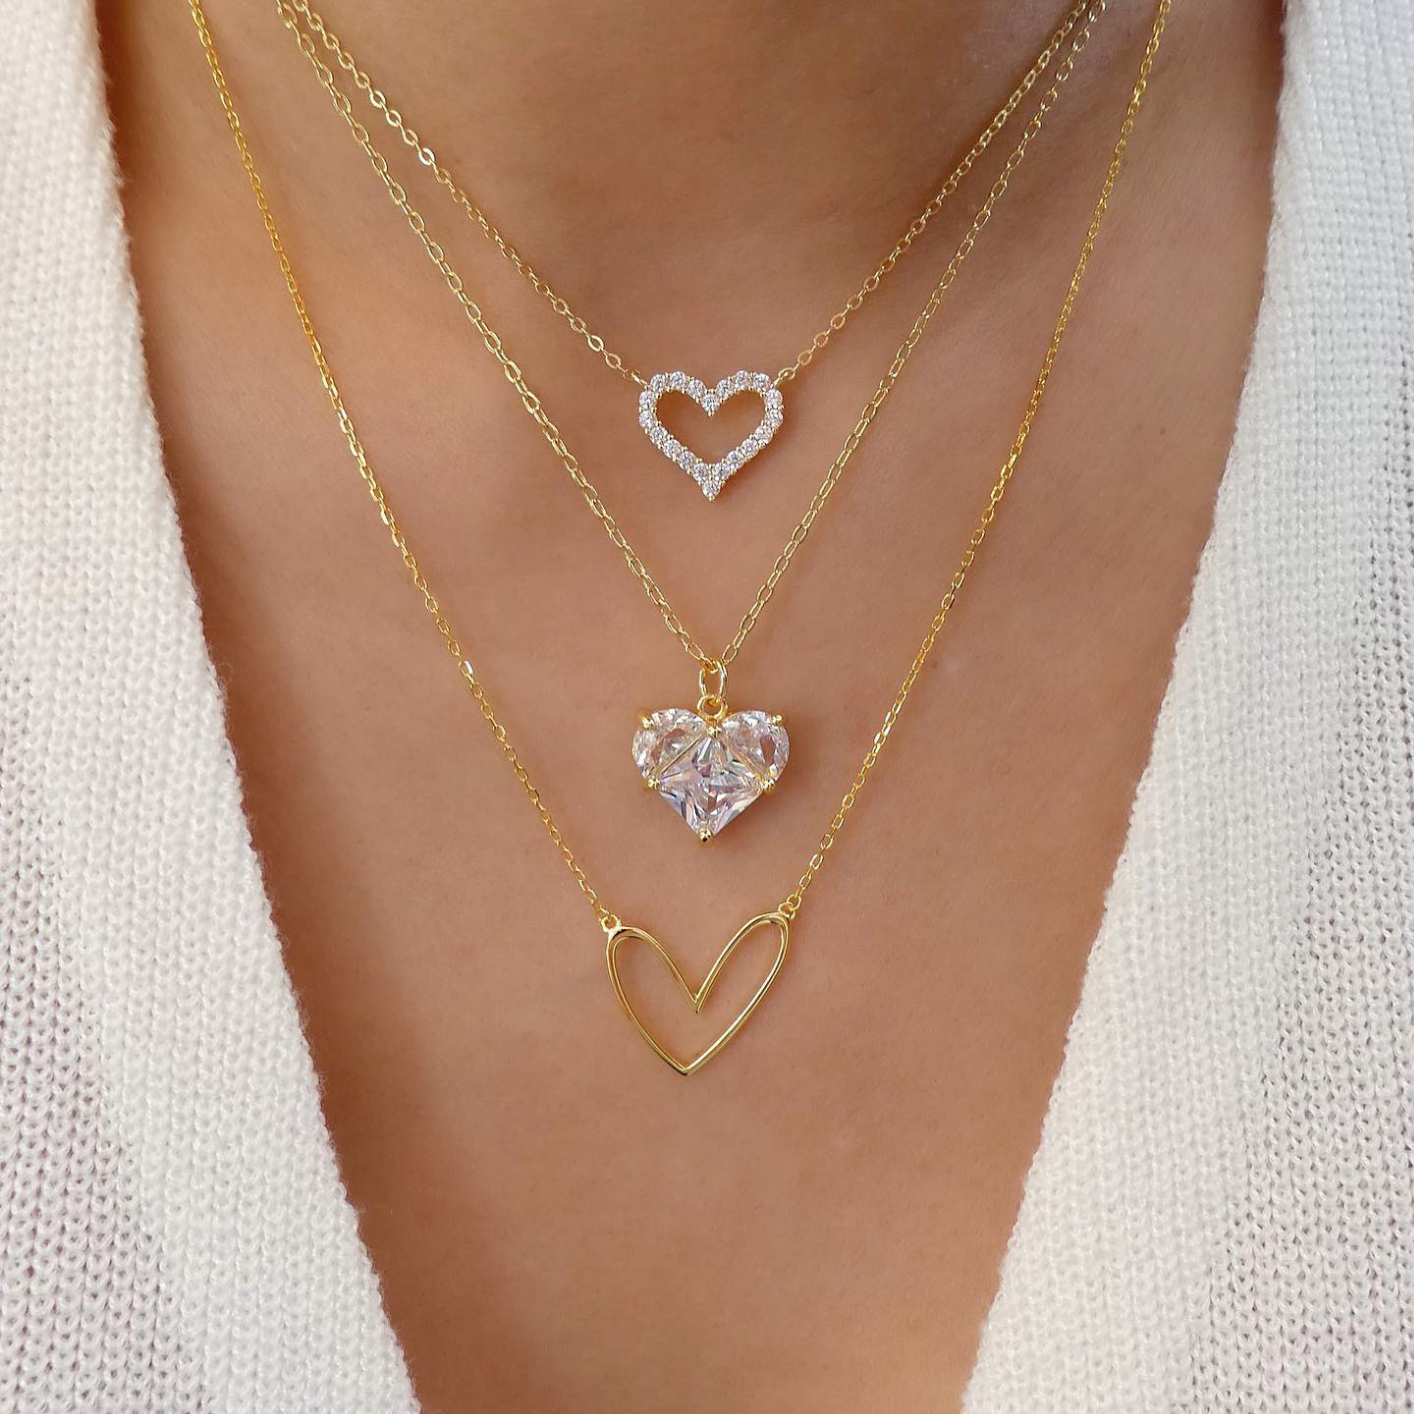 5753201HB Zircon Heart Pendant Necklaces for Women Girls Gold Color Multilayer Clavicle Chain Necklaces New Fashion Trendy Jewelry